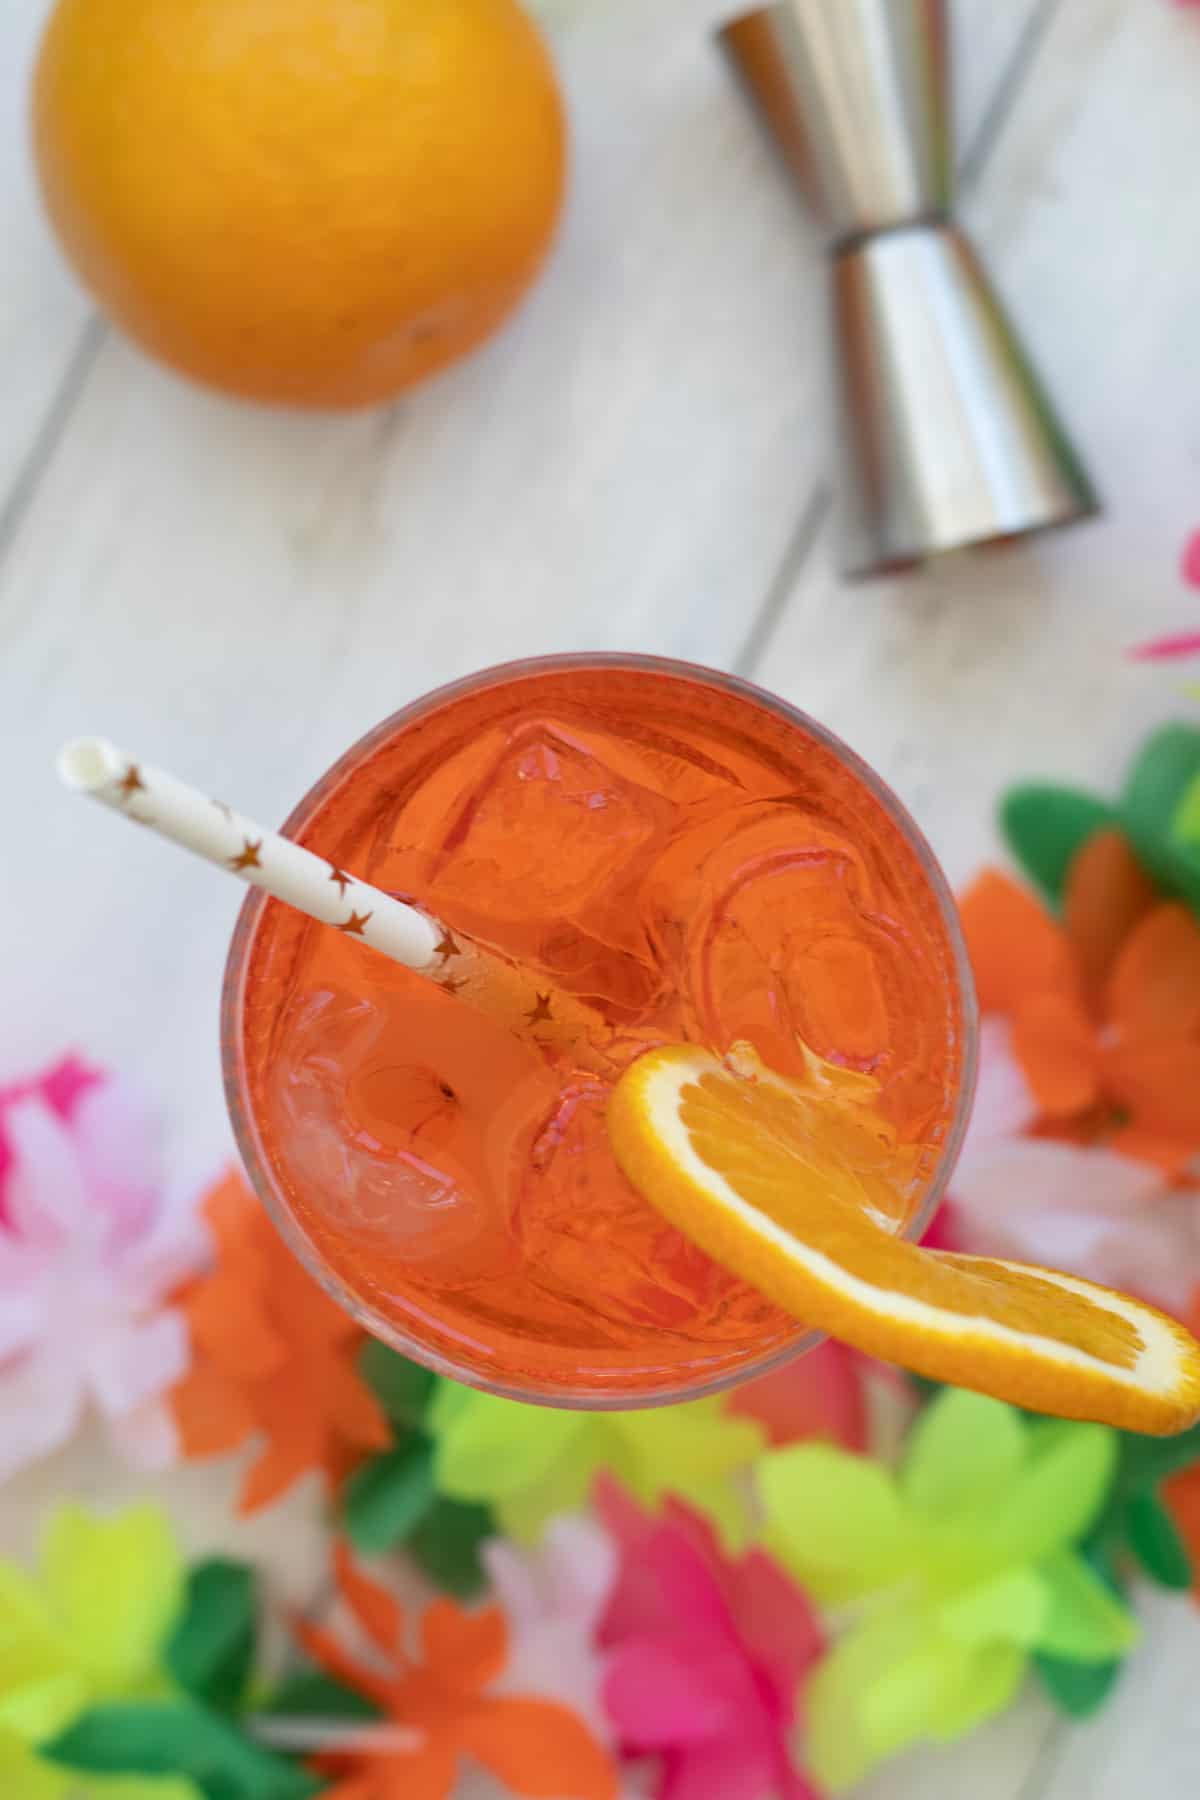 top down view of an aperol spritz garnished with orange and a straw, around it are an orange, a measure and some plastic flowers